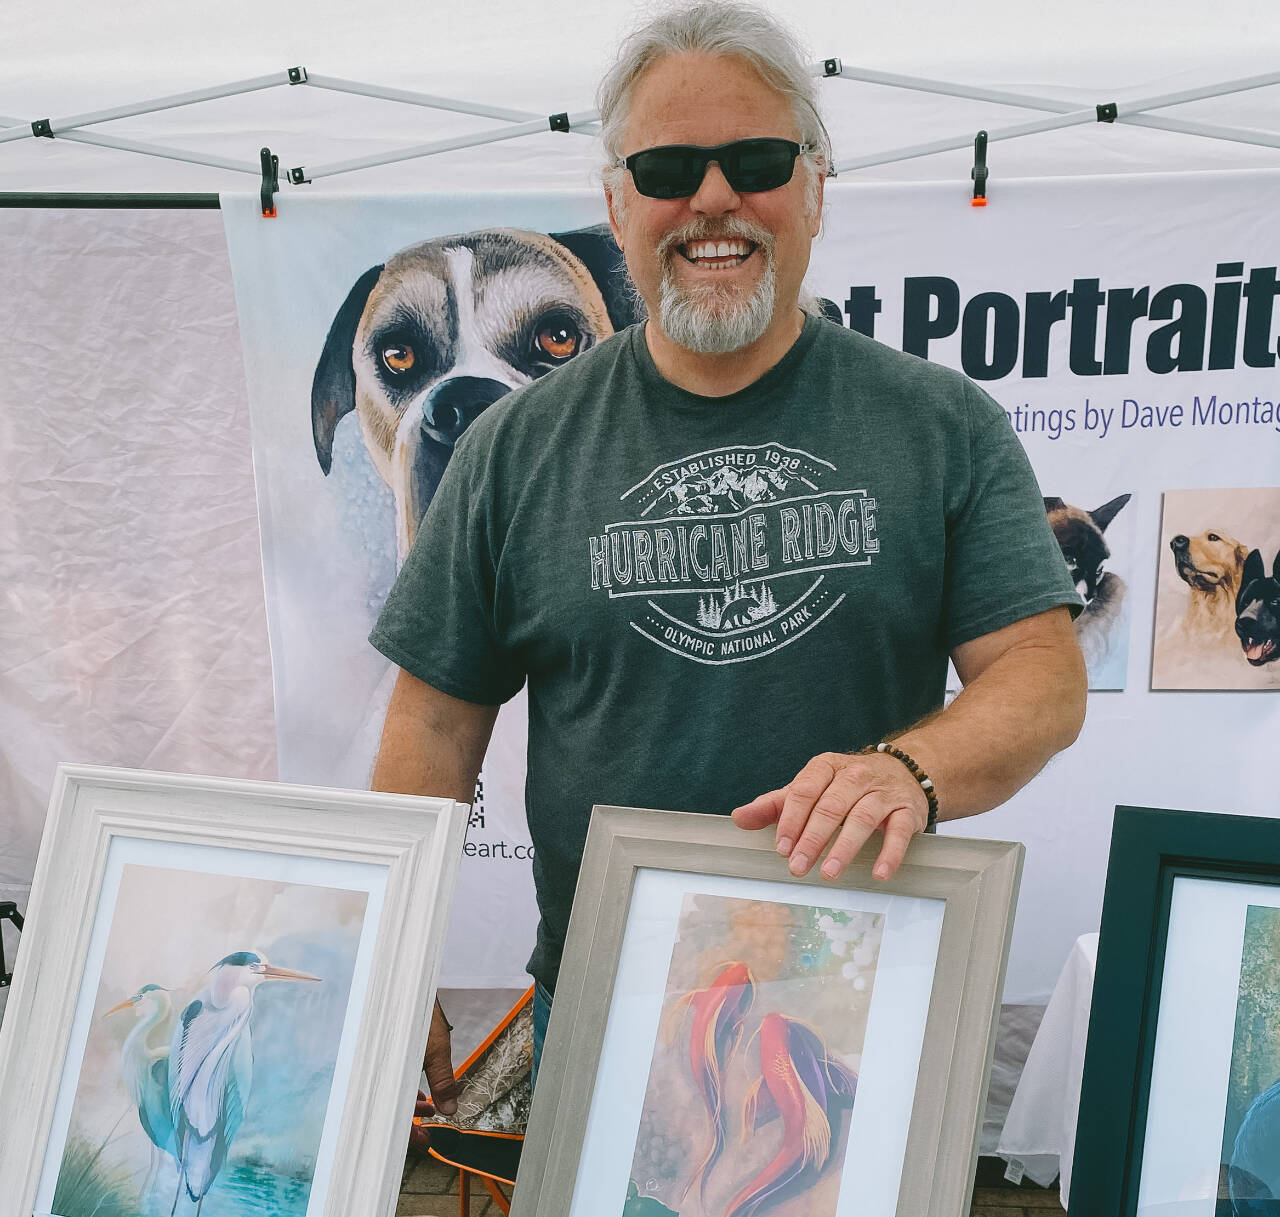 Photo by Bailey Loveless/Sequim Farmers & Artisans Market (SFAM)
Dave Montague displays some artwork at his Sequim Farmers & Artisans Market booth.